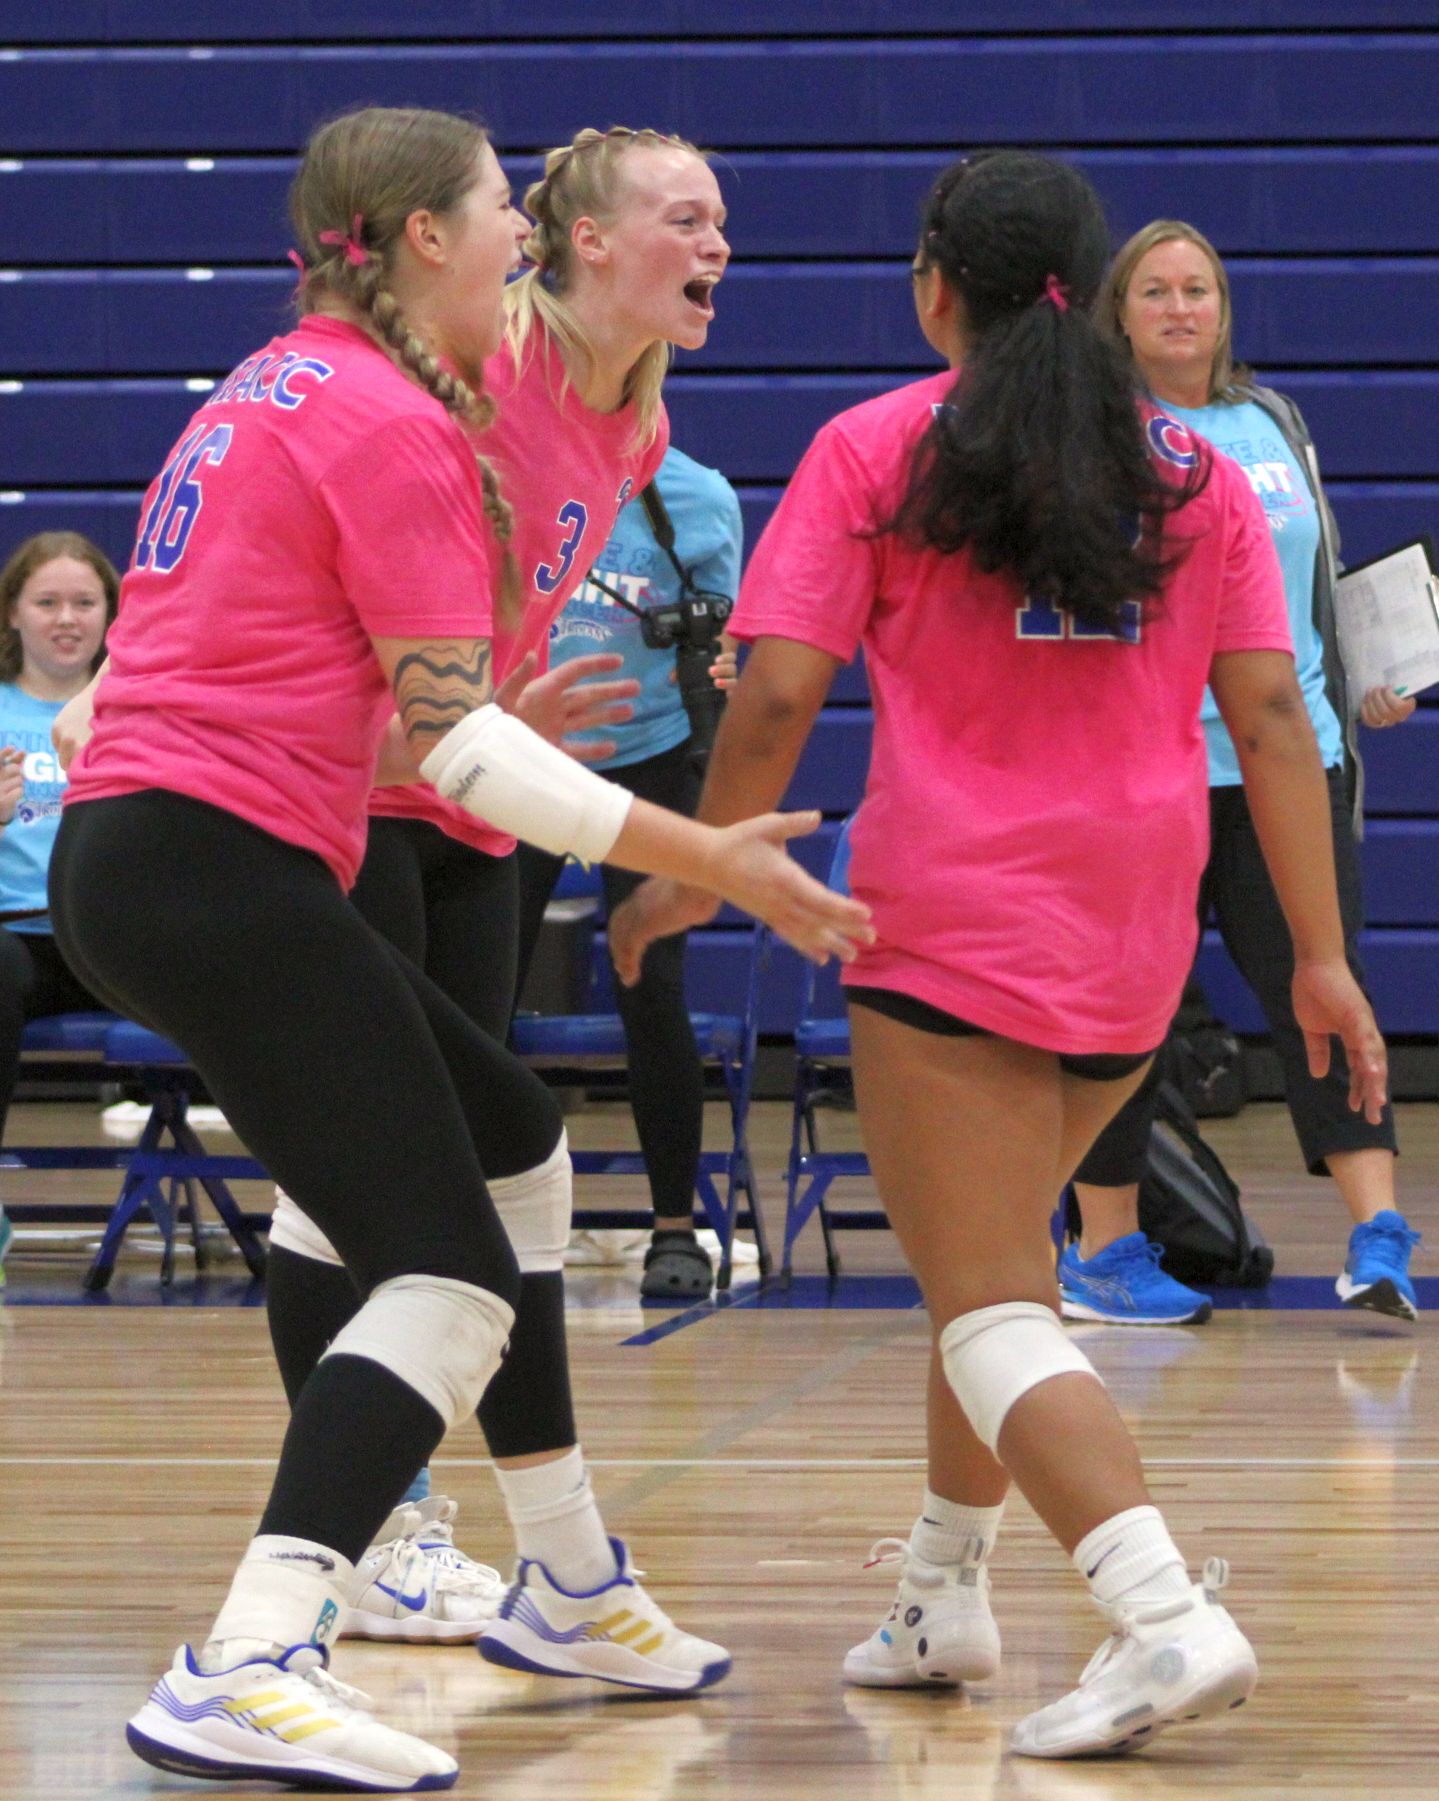 NIACC celebrates a point late in set 4 during the Trojans' 3-1 win over Iowa Lakes Thursday in the NIACC gym.